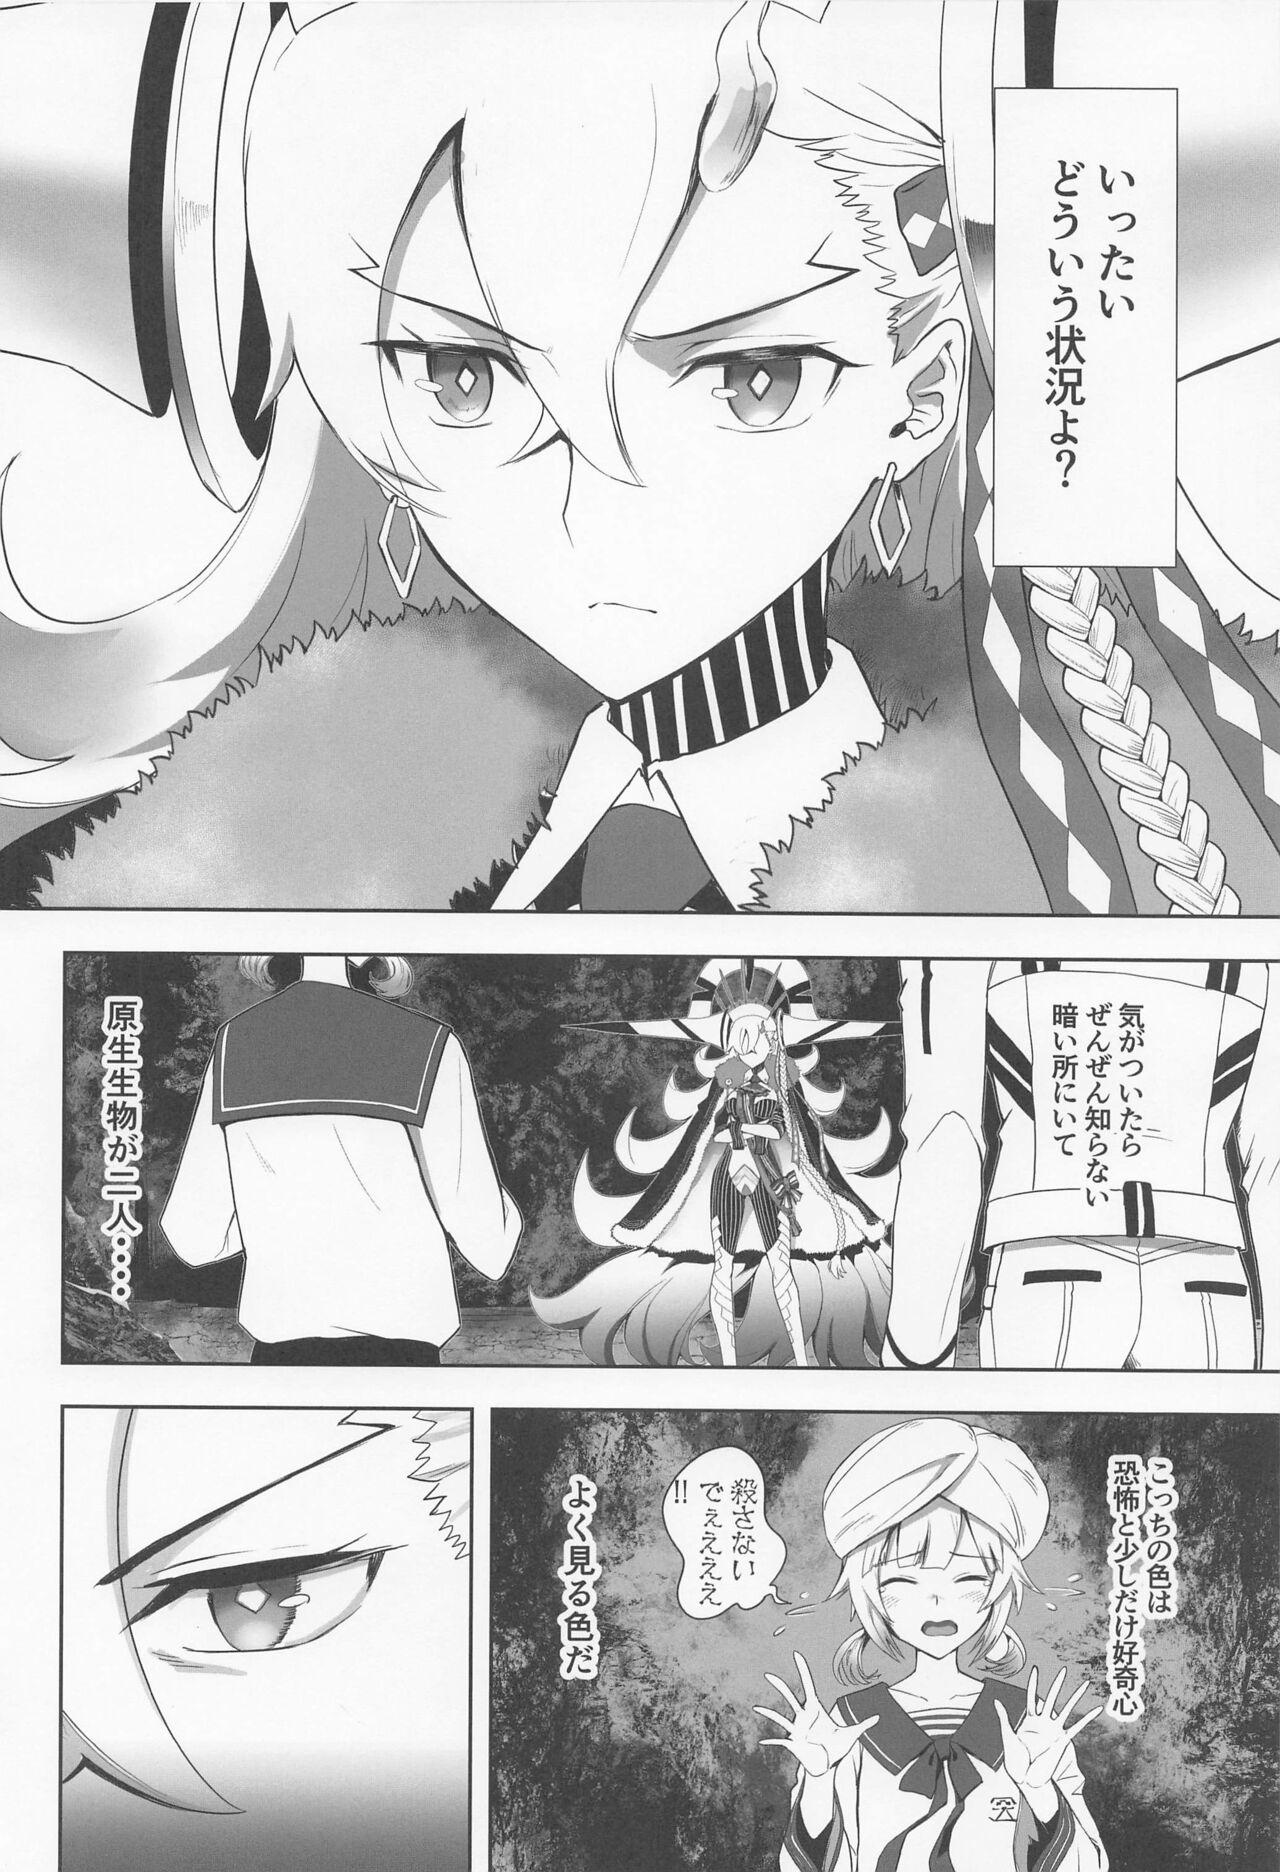 Show LOVELY★U - Fate grand order Maduro - Page 3